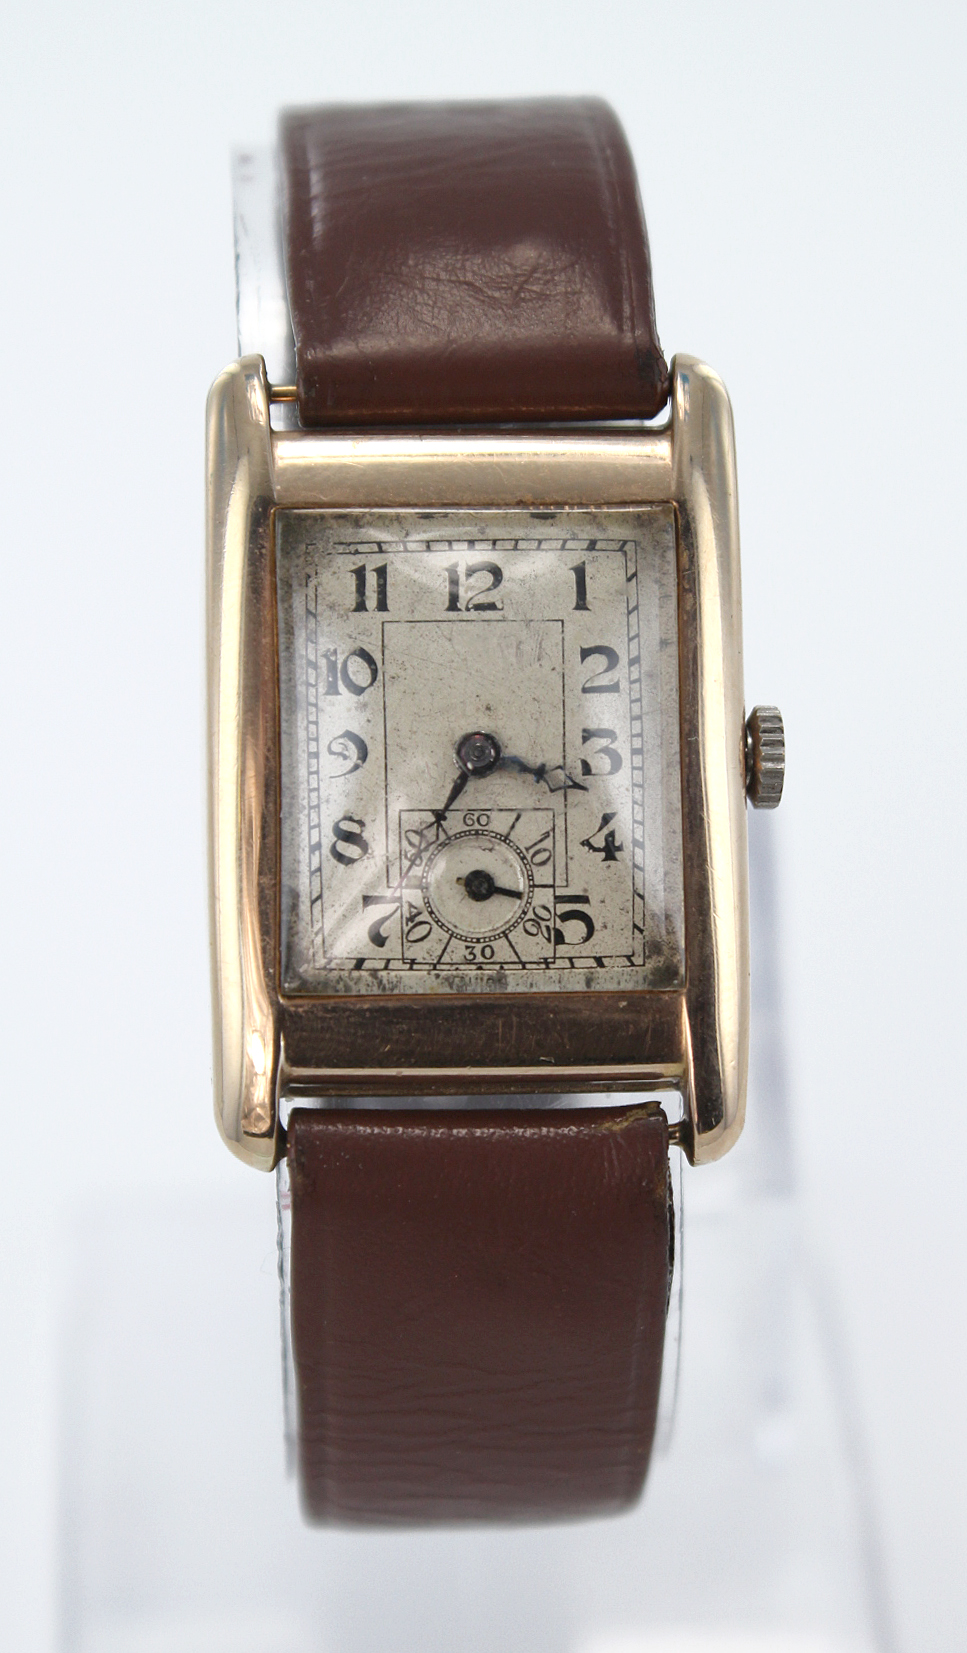 Gents 9ct cased wristwatch import marks for Glasgow 1930, watch working when catalogued